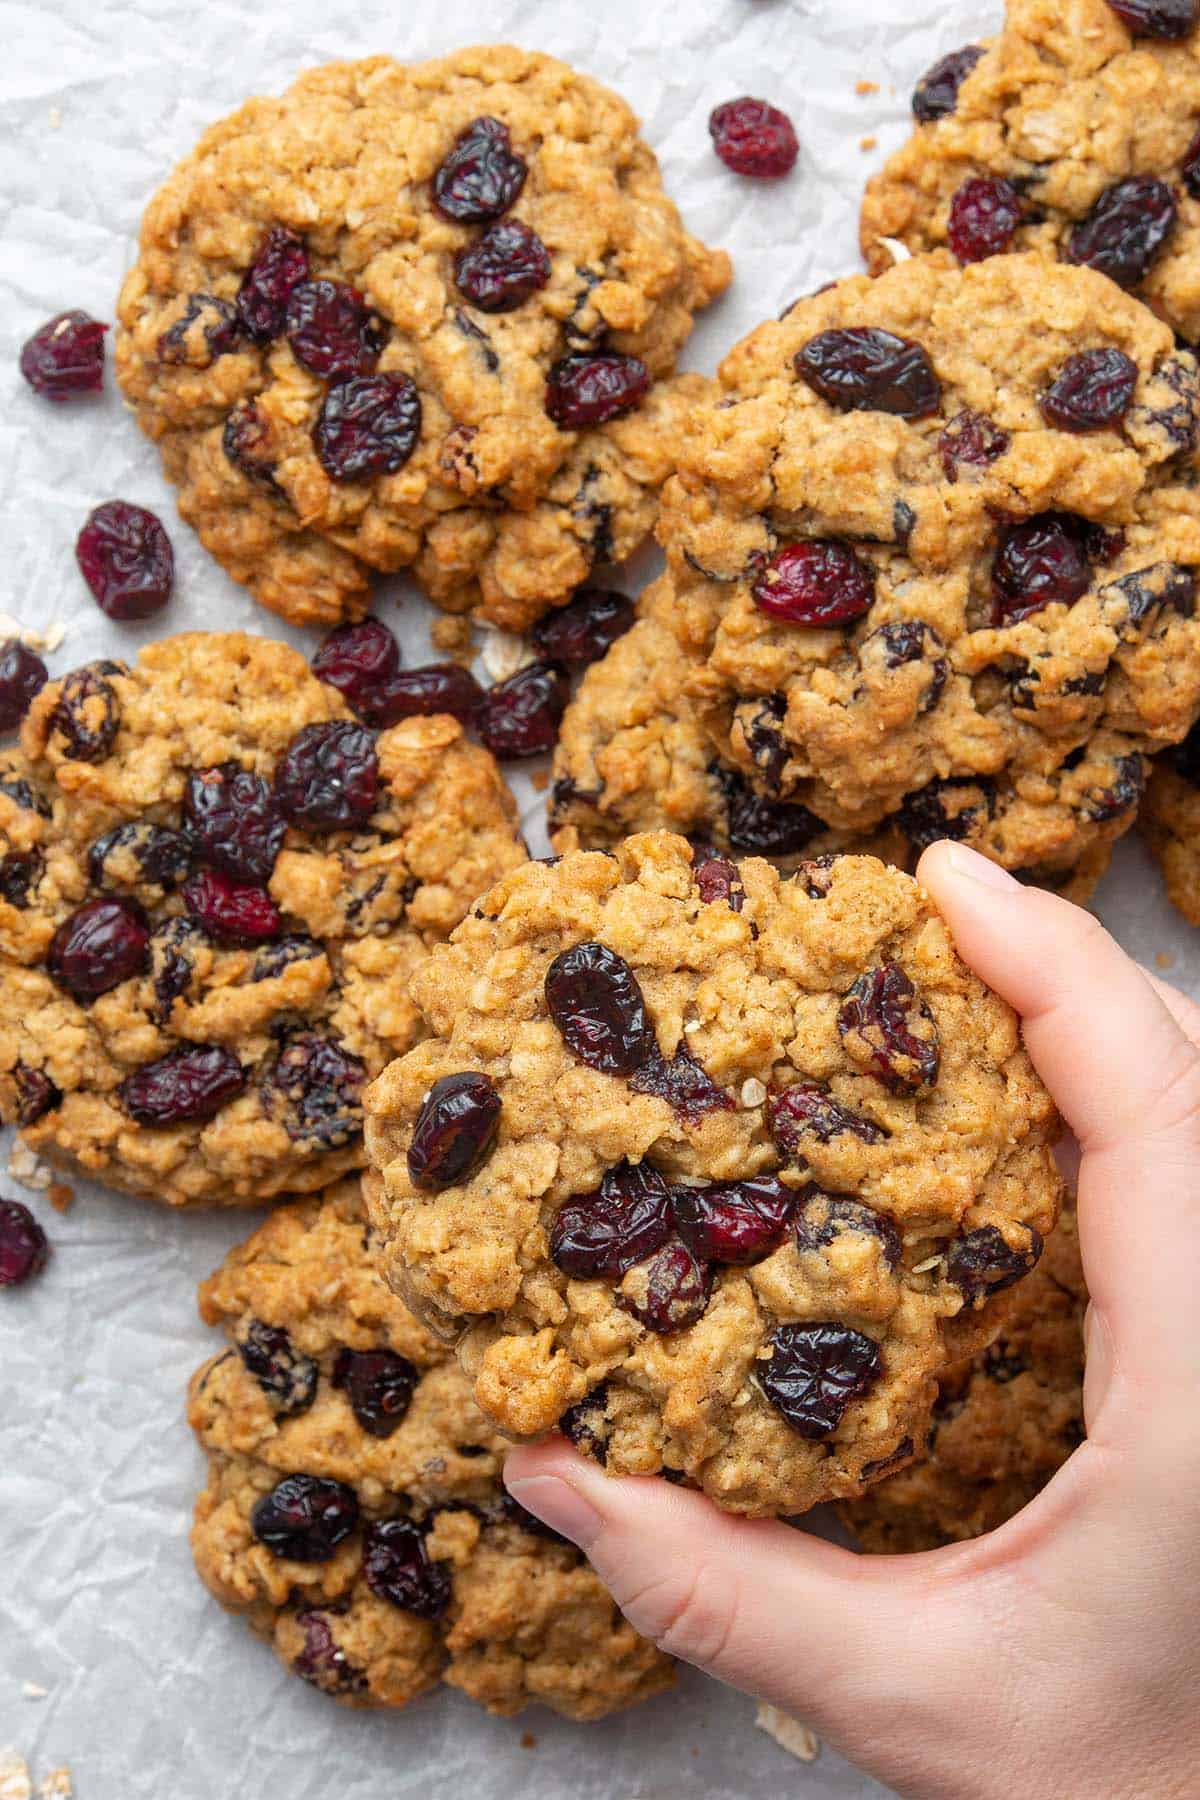 Oatmeal craisin cookies on a white paper